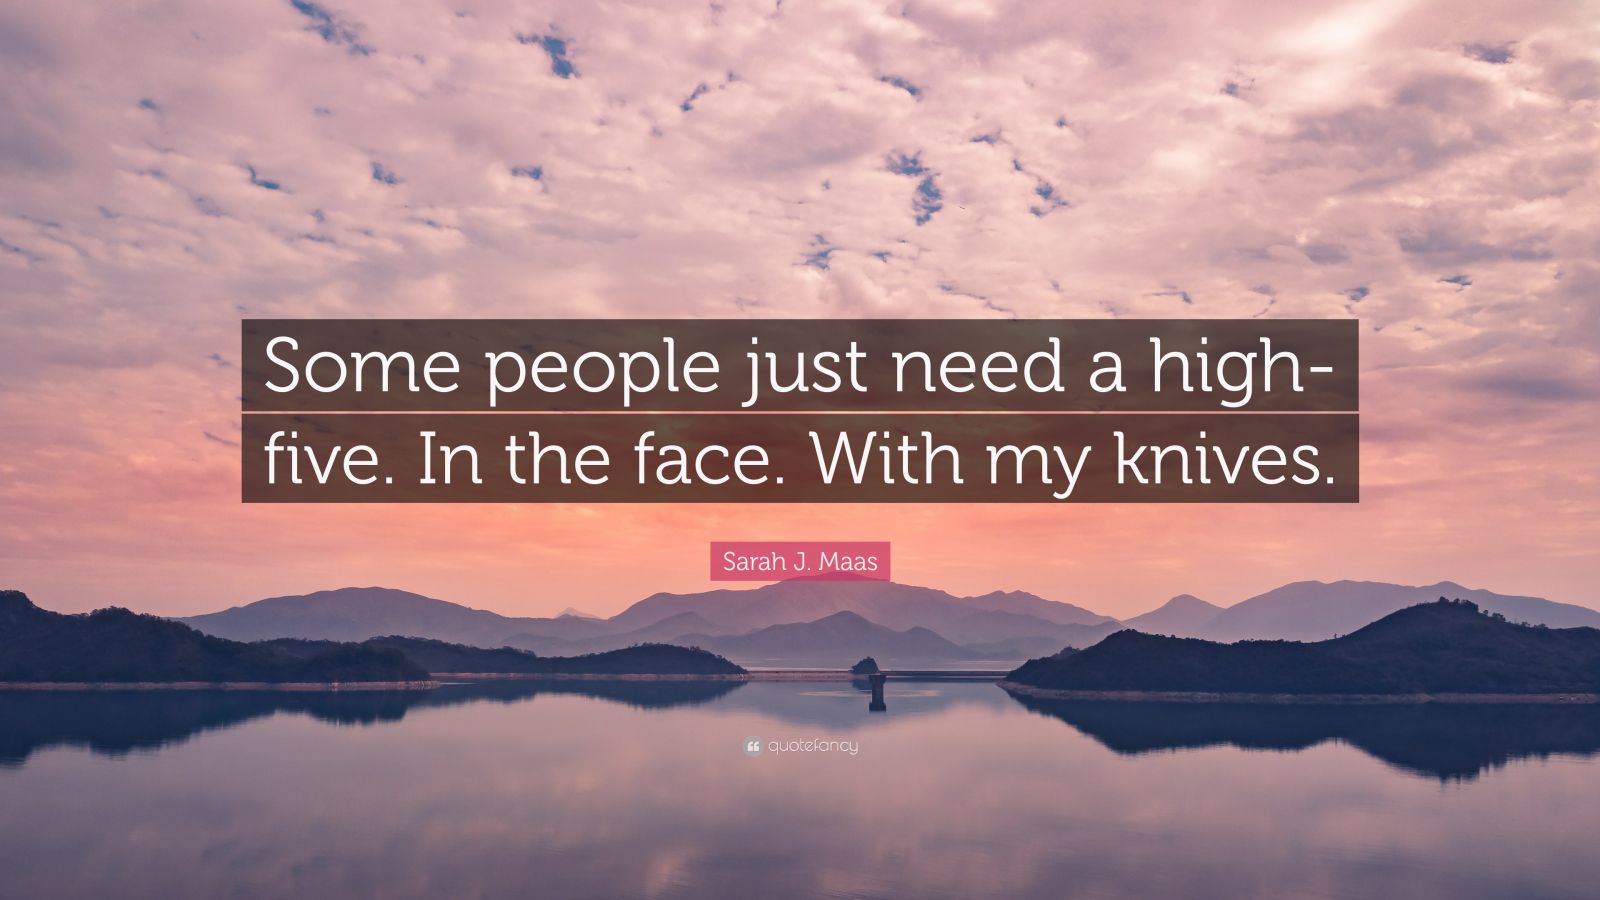 some people just need a highfive in the face